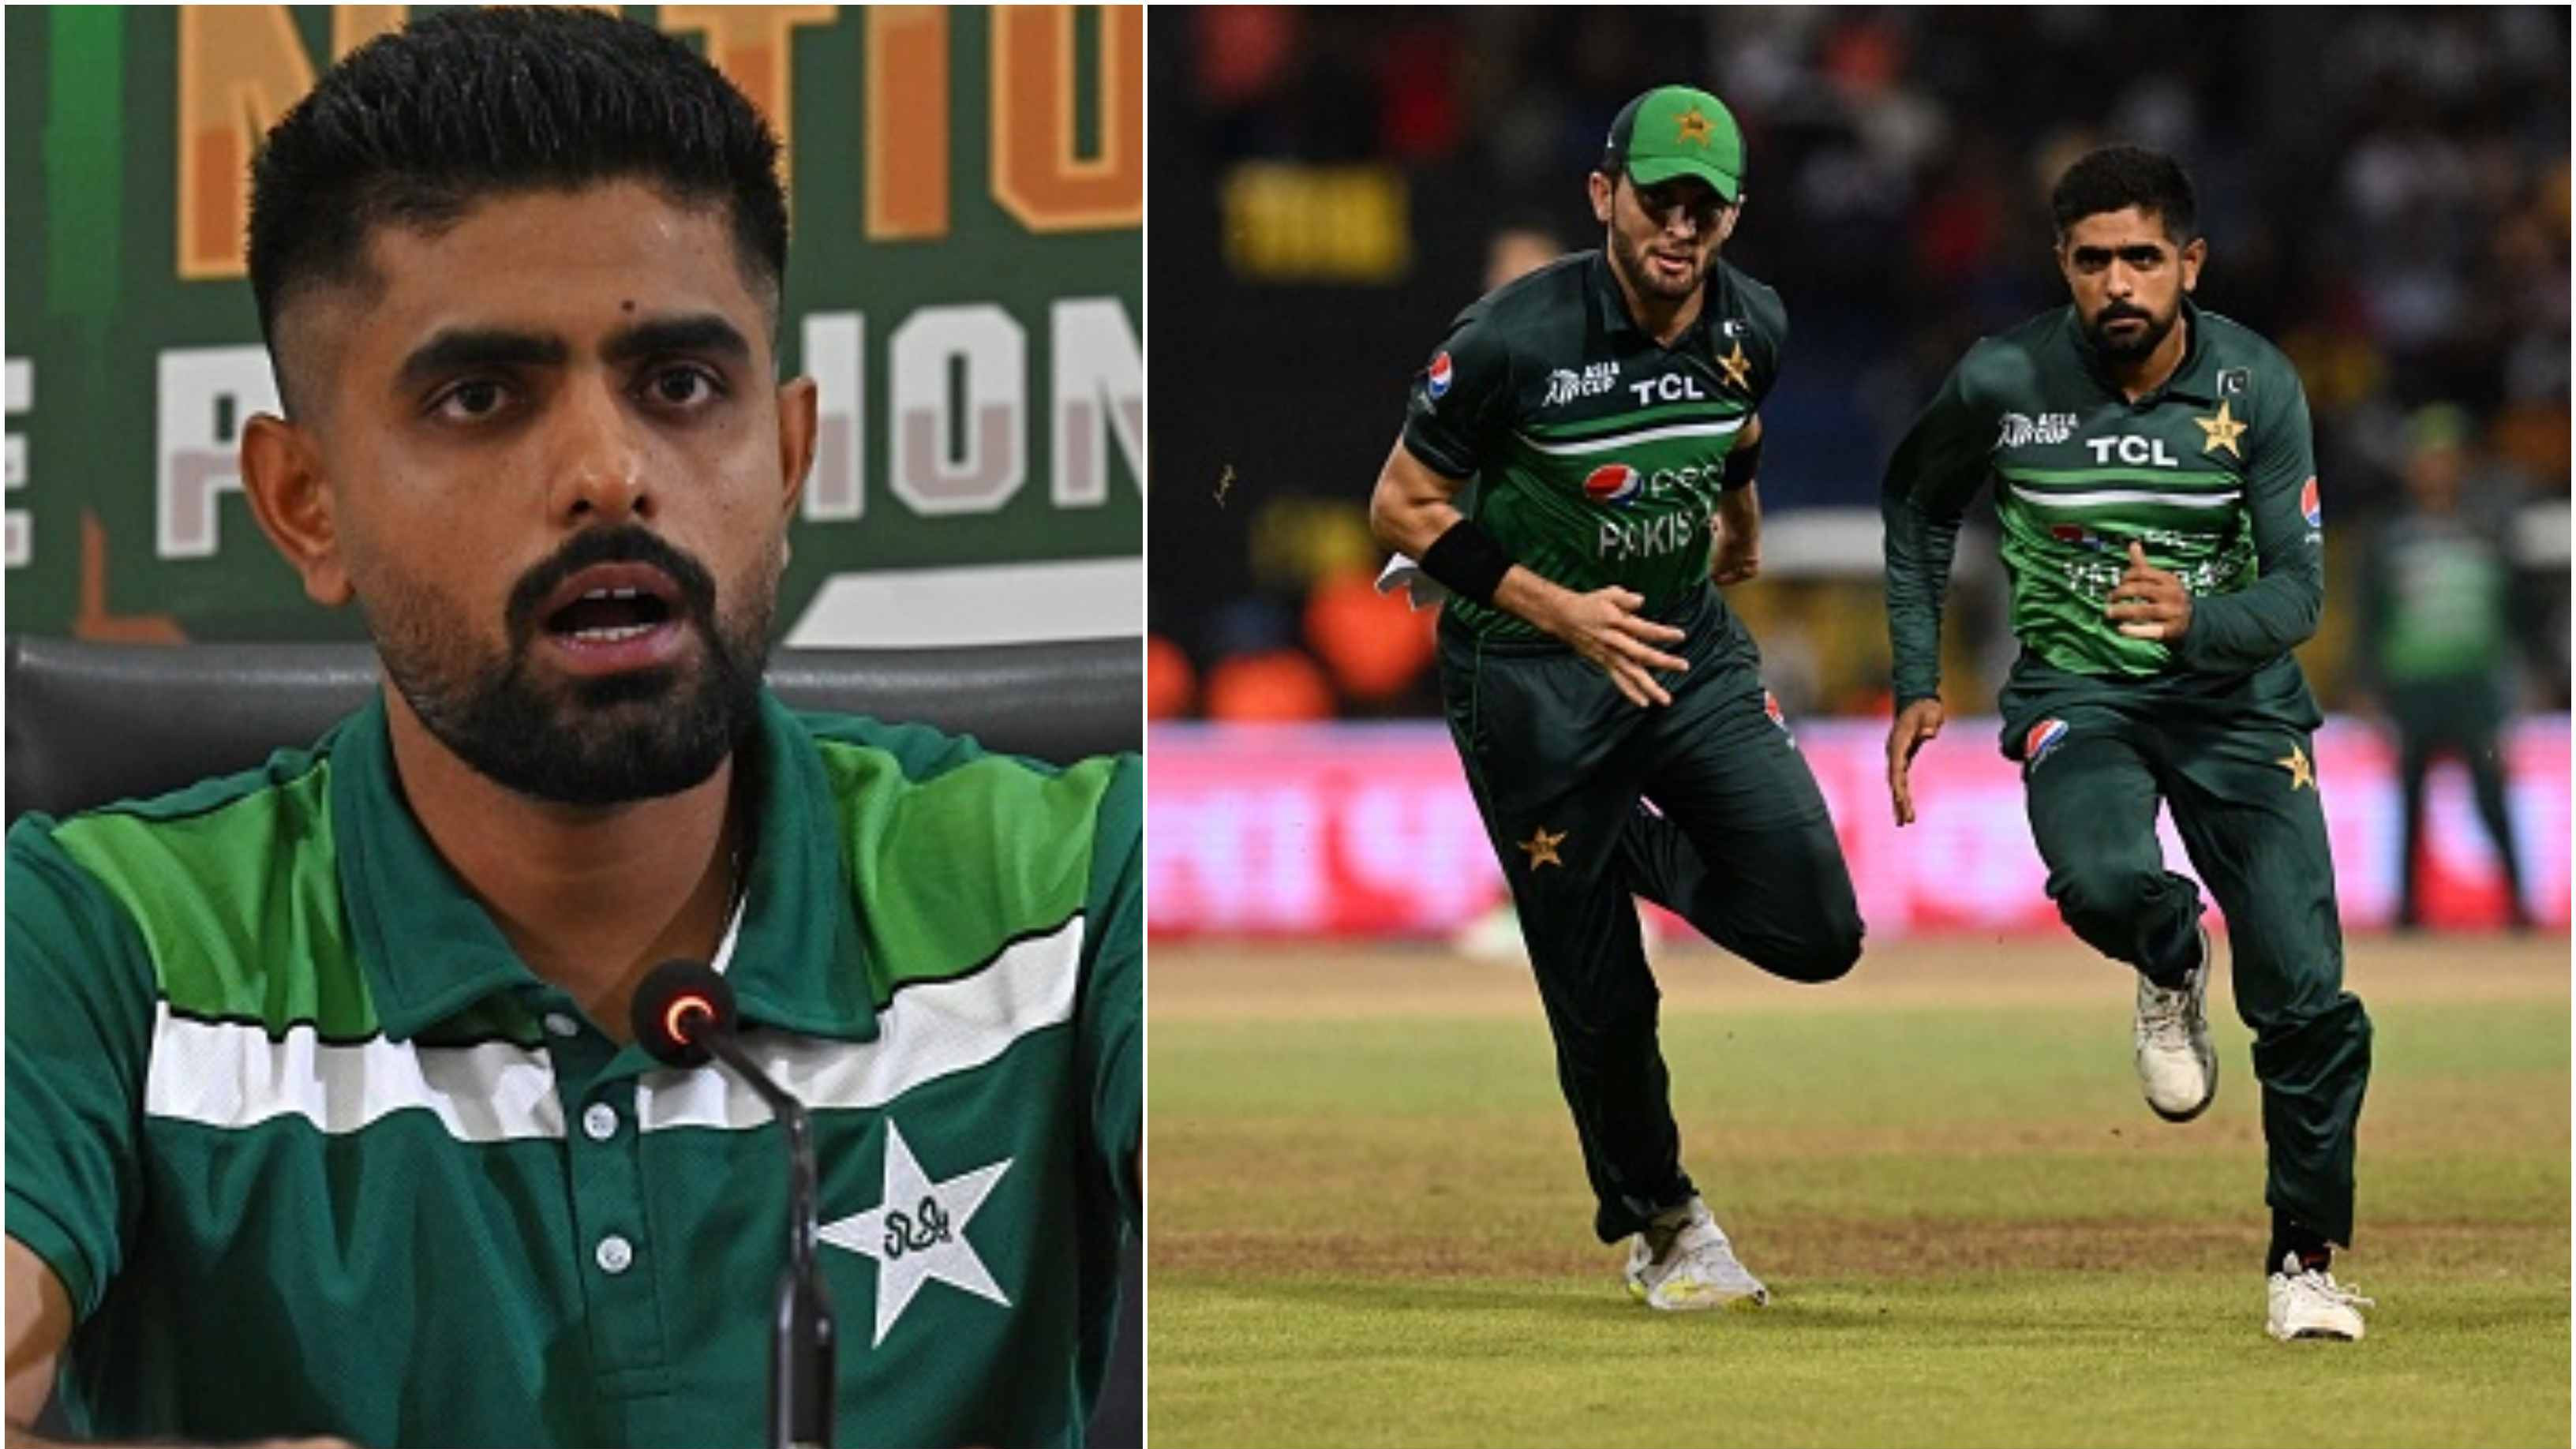 “Everyone gives me respect…”: Babar Azam breaks silence on his alleged verbal spat with Shaheen Afridi